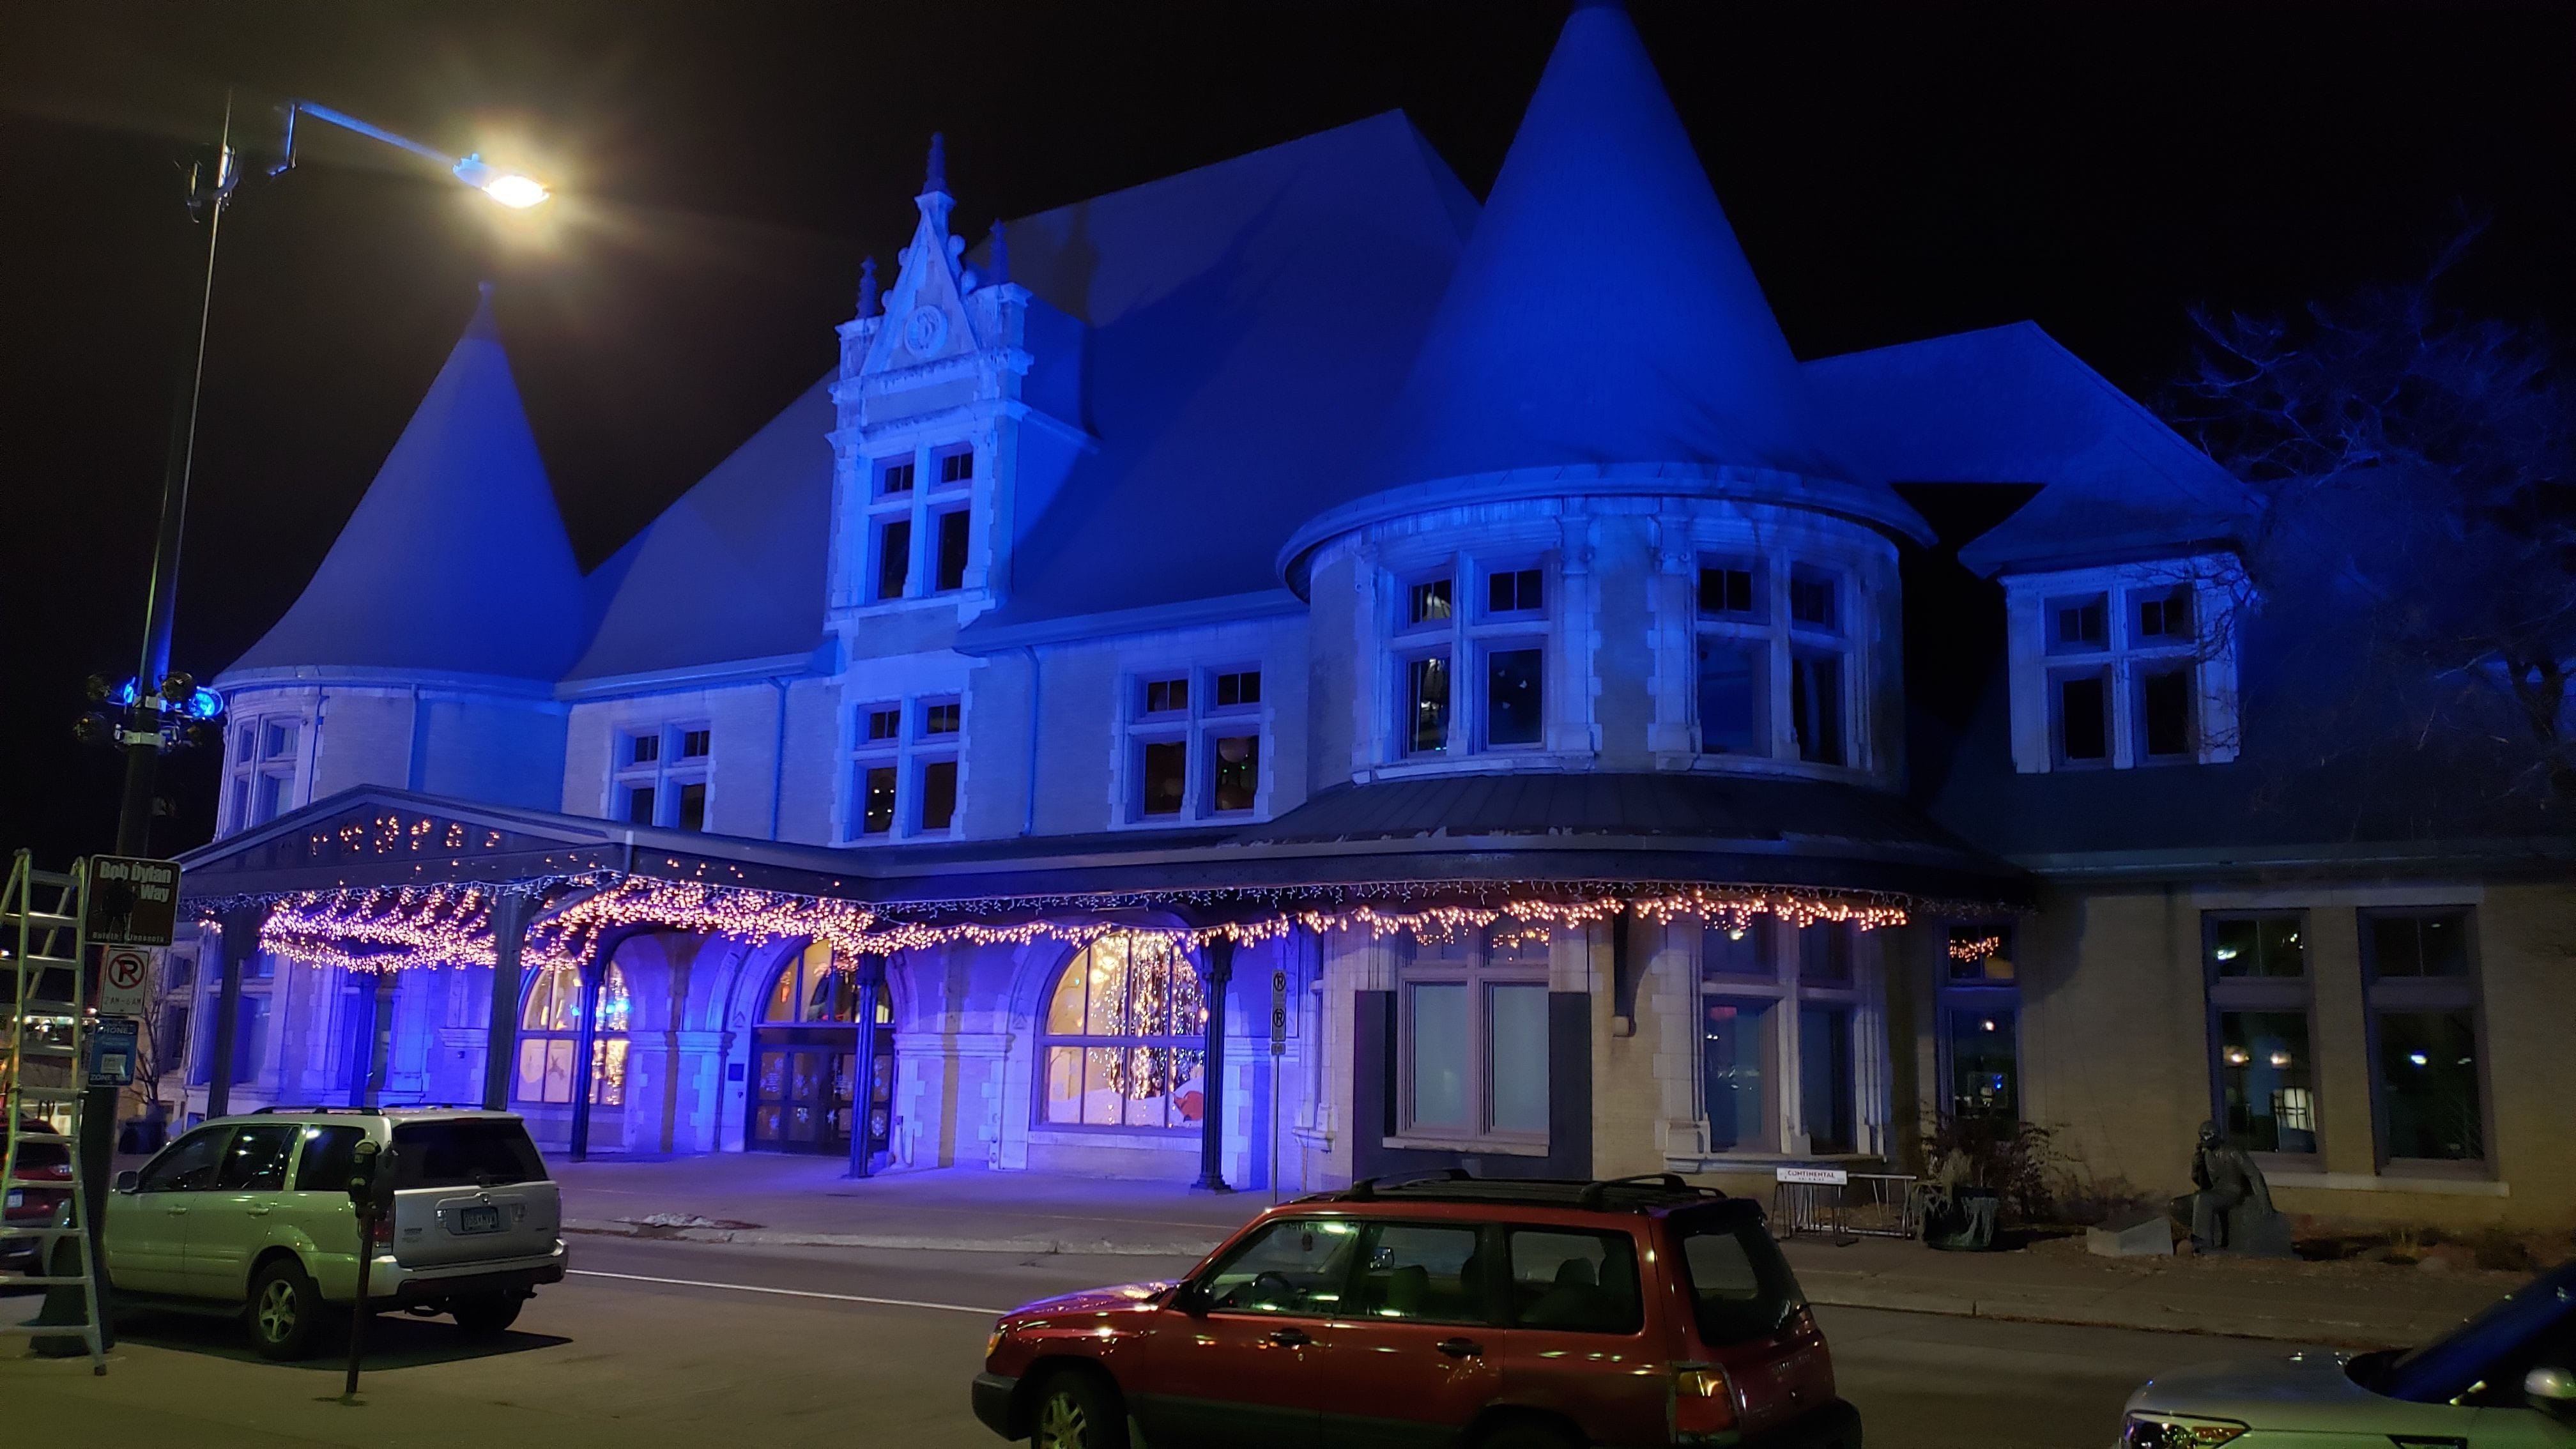 The Duluth Depot with blue lighting.